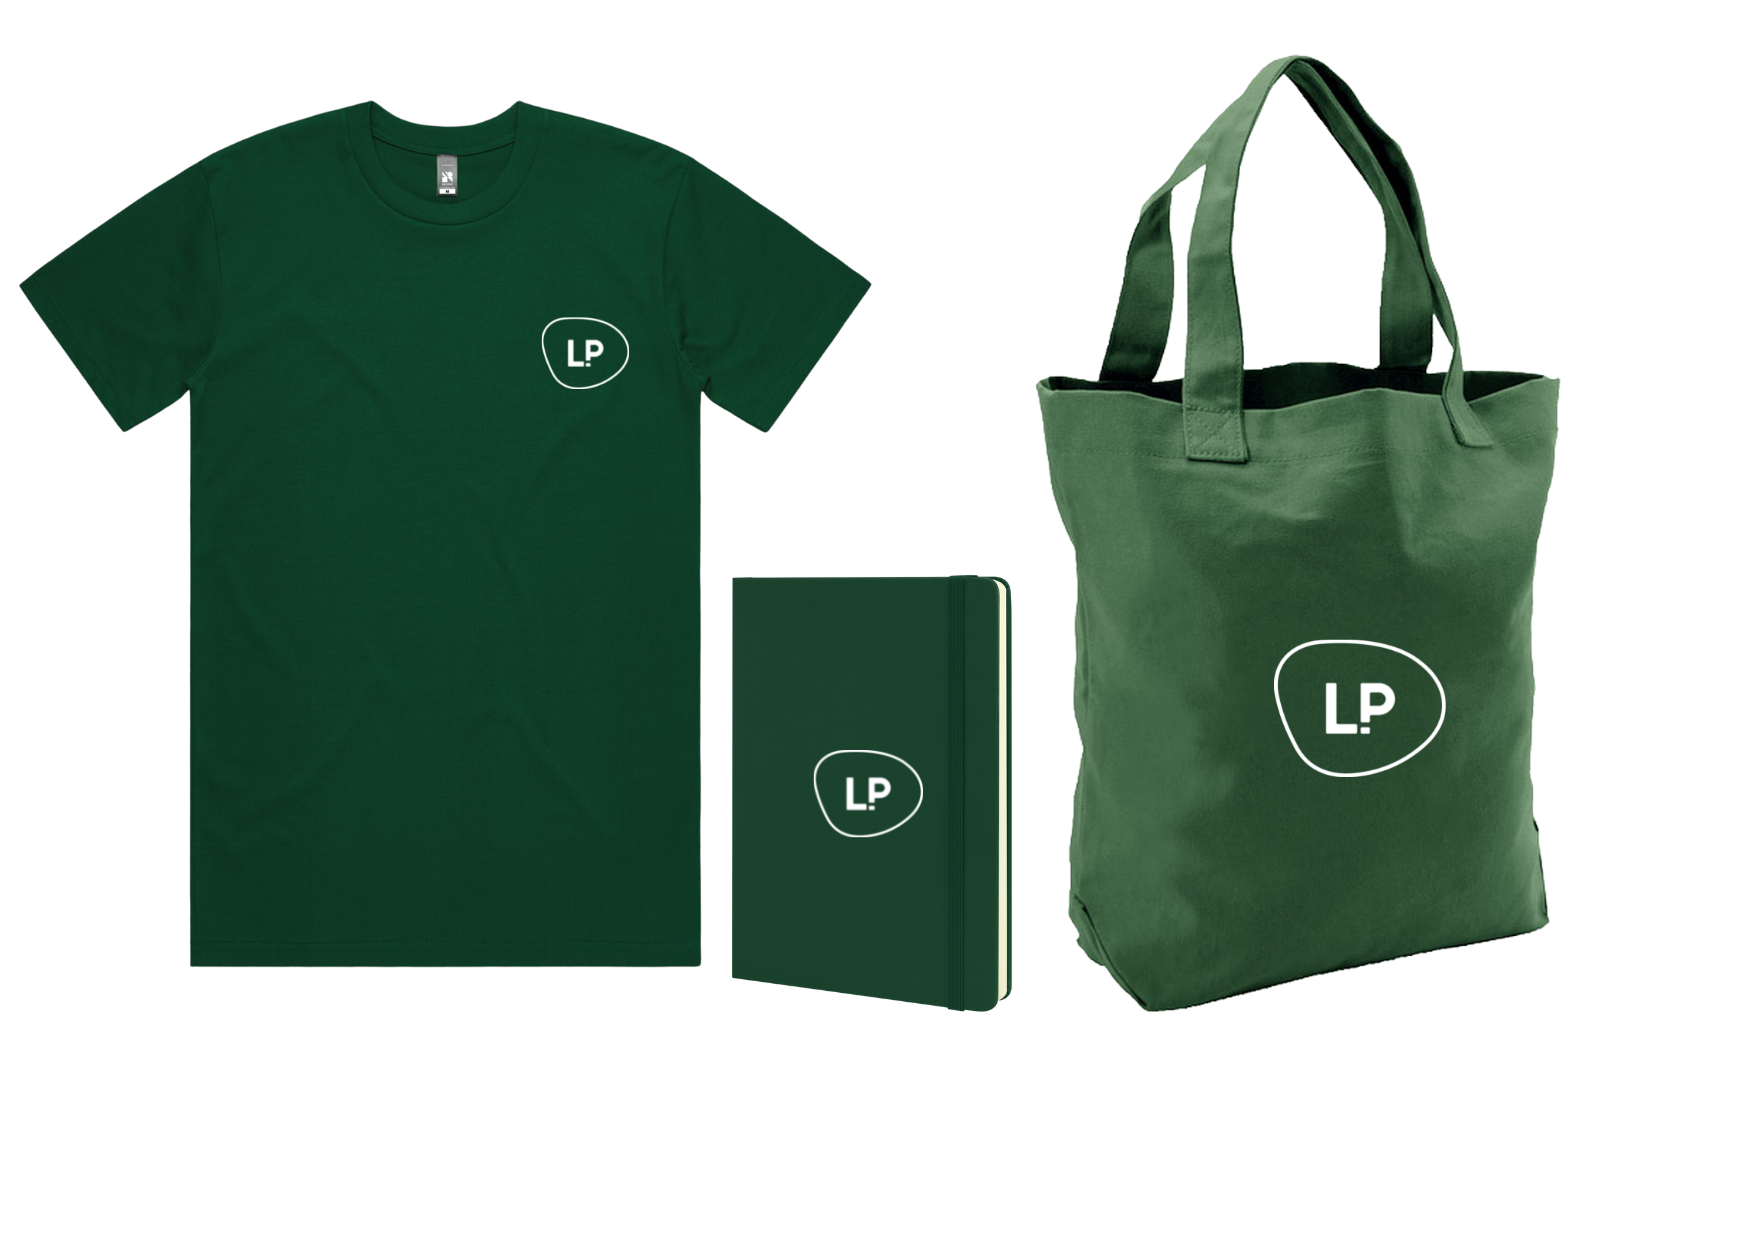 three promotional items that are used in onboarding gift packs